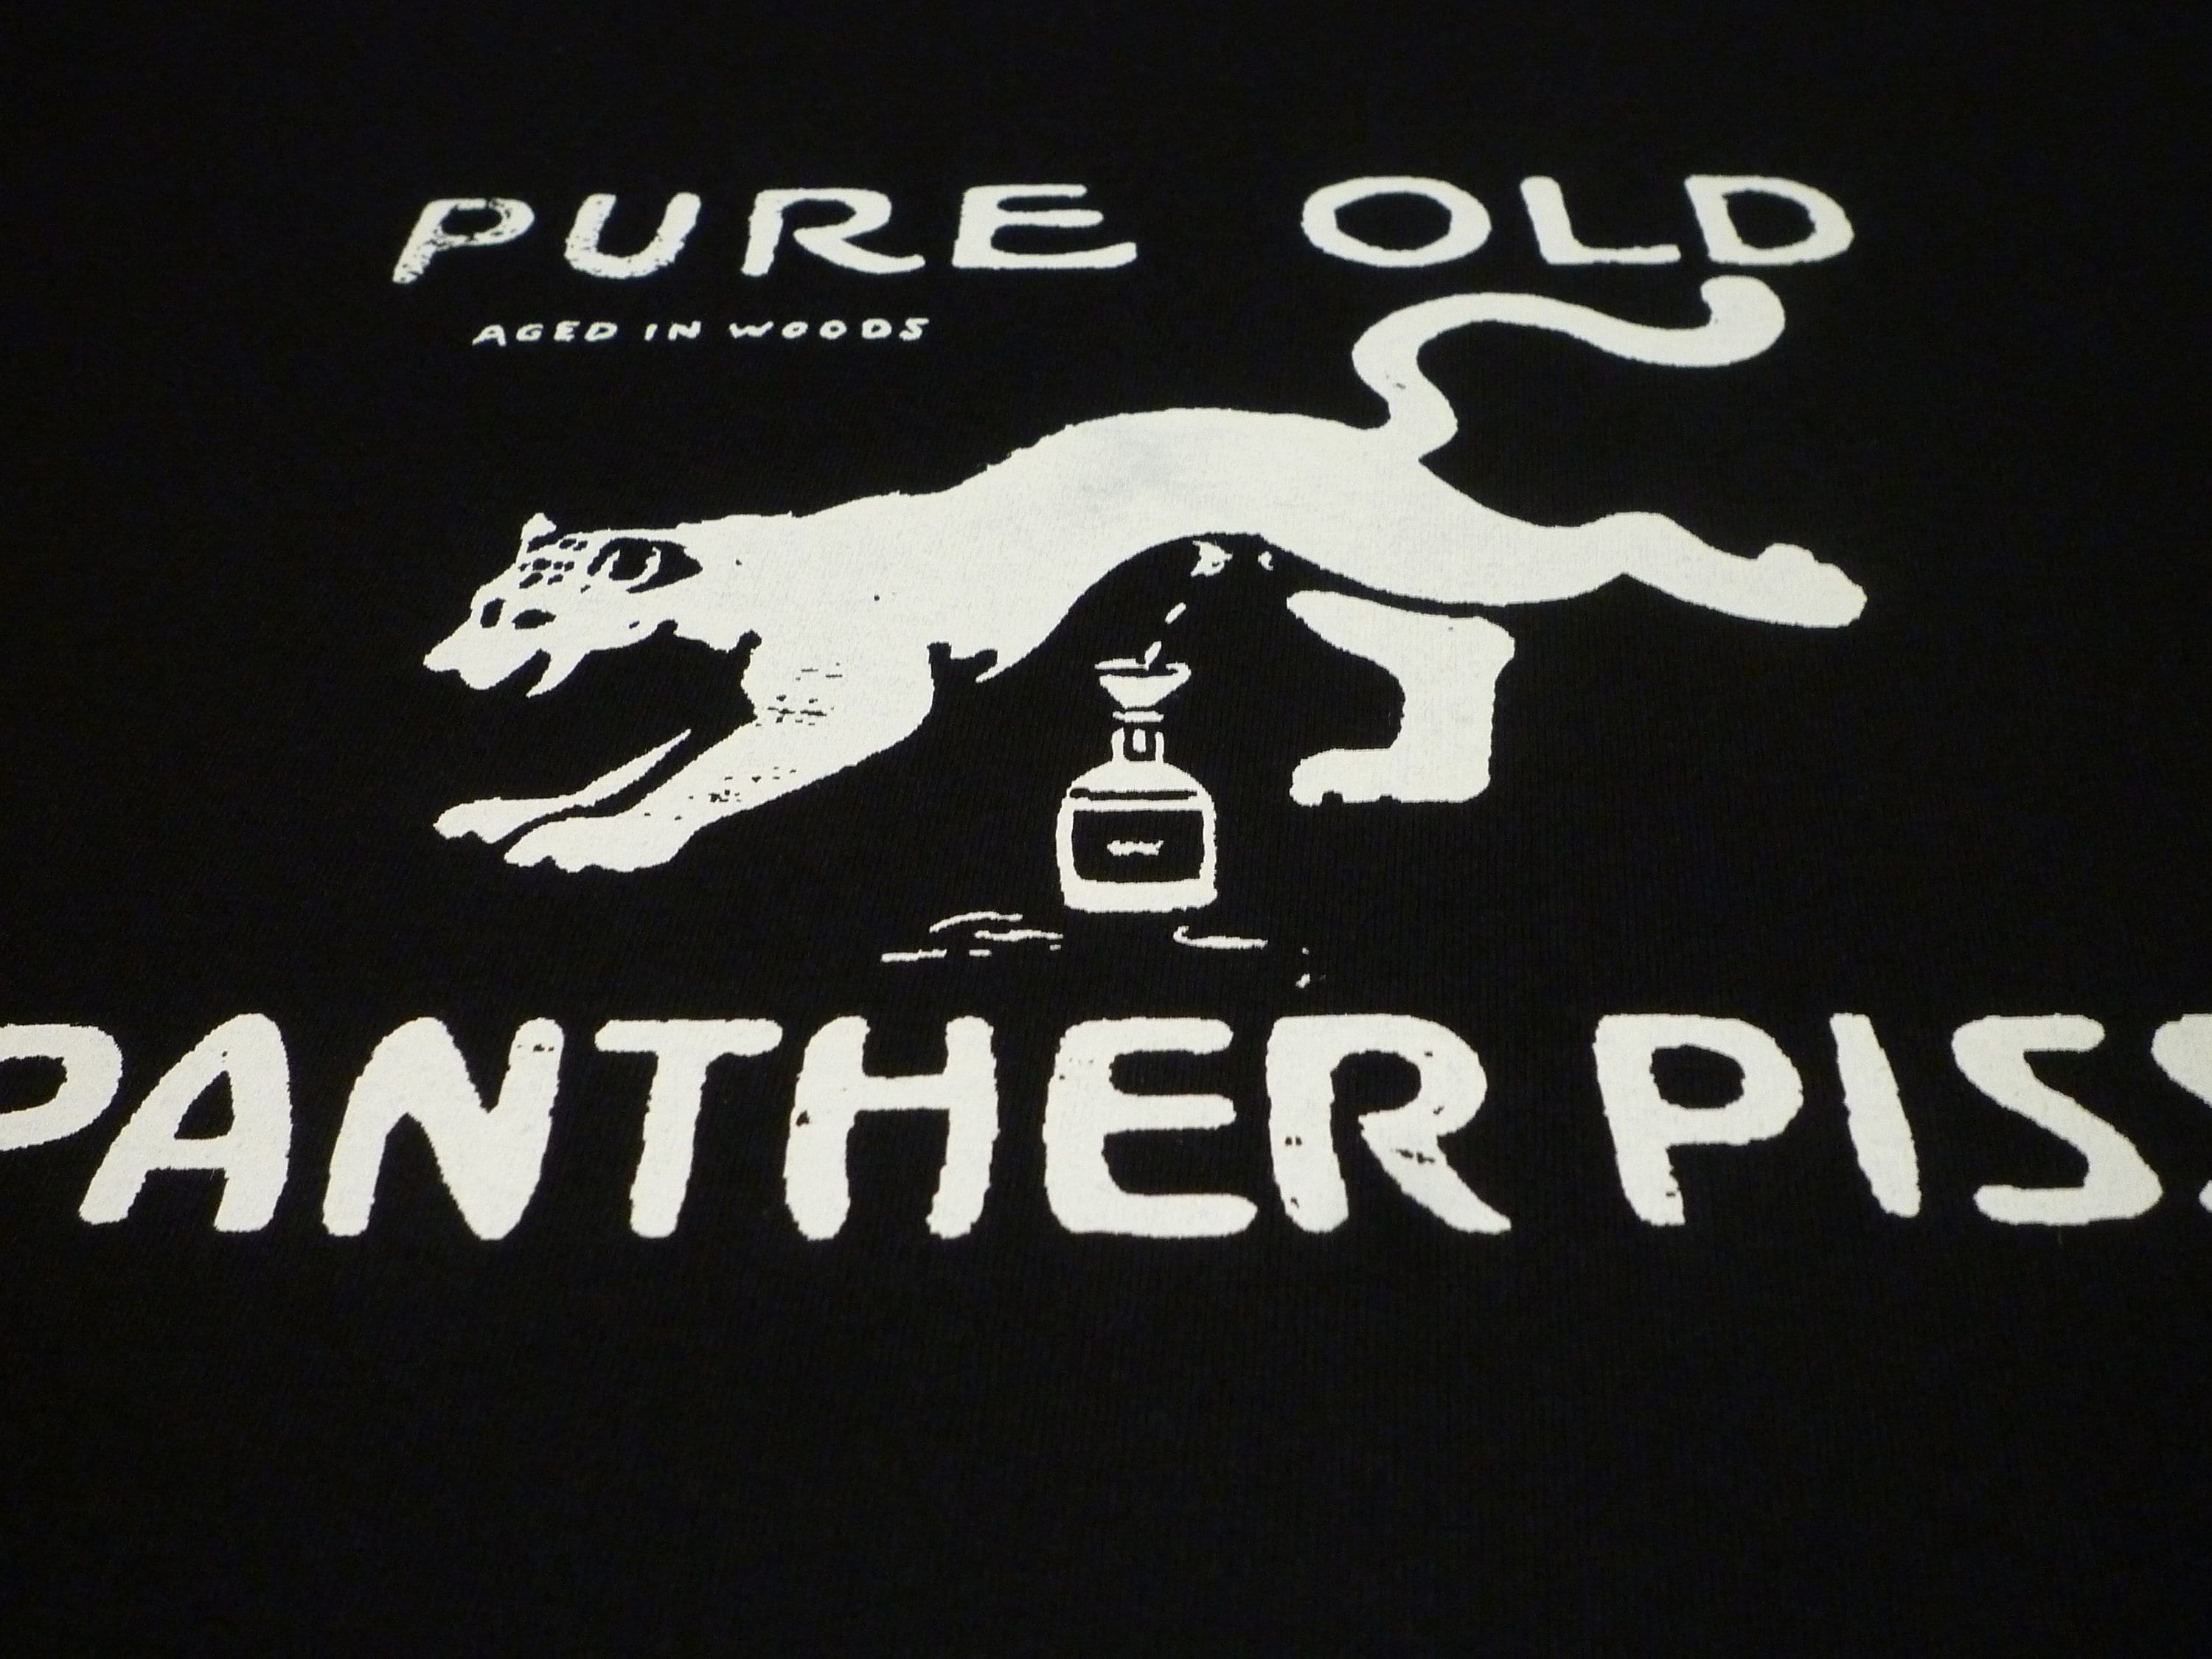 Pure old panther piss